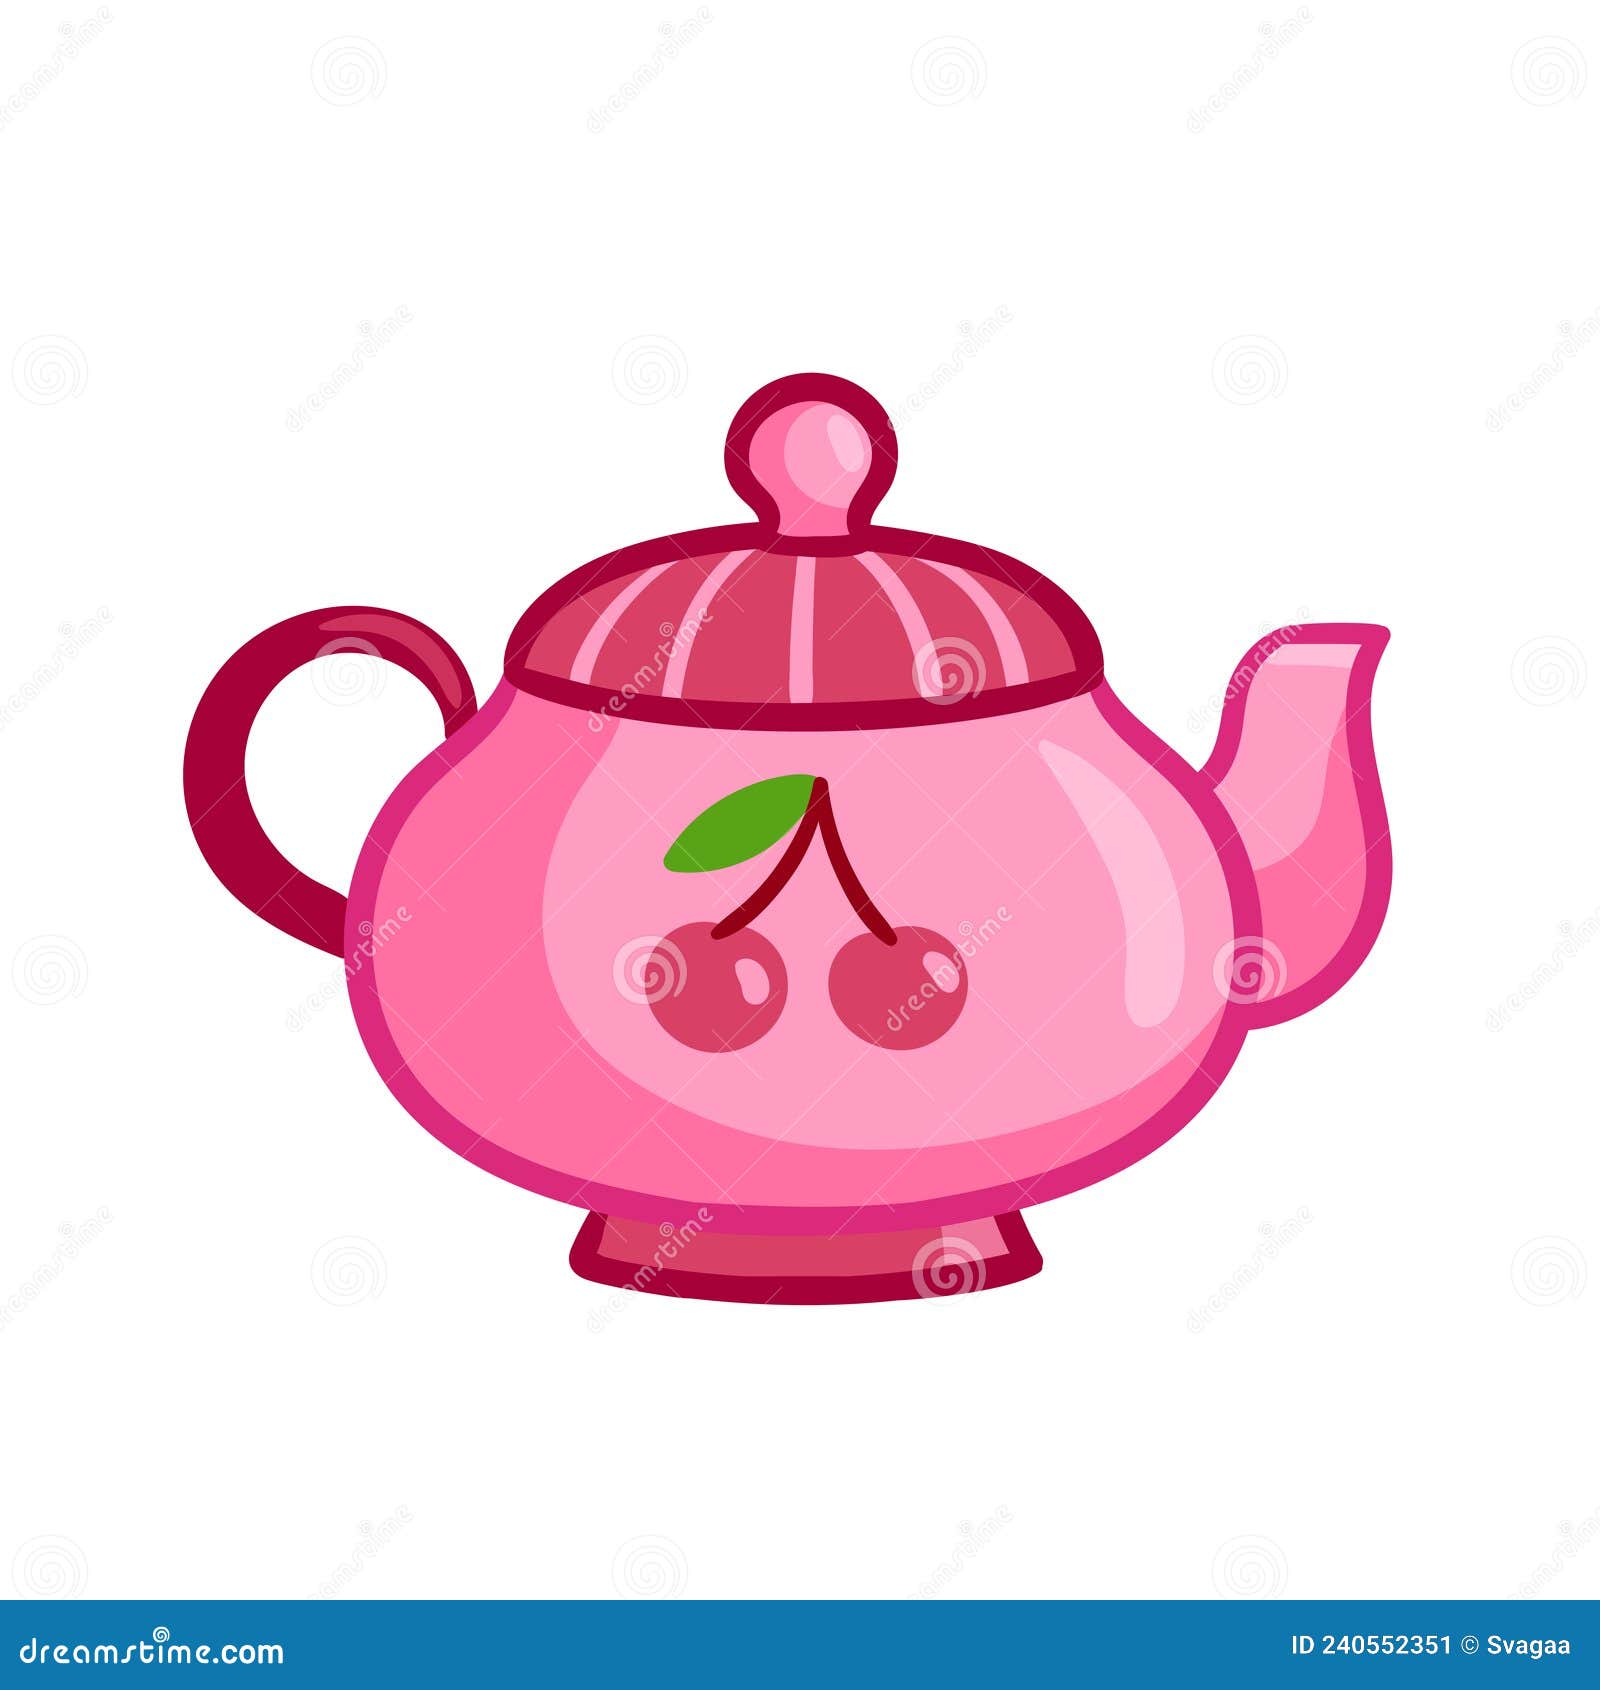 https://thumbs.dreamstime.com/z/beautiful-teapot-cartoon-style-vector-illustration-pink-white-background-240552351.jpg